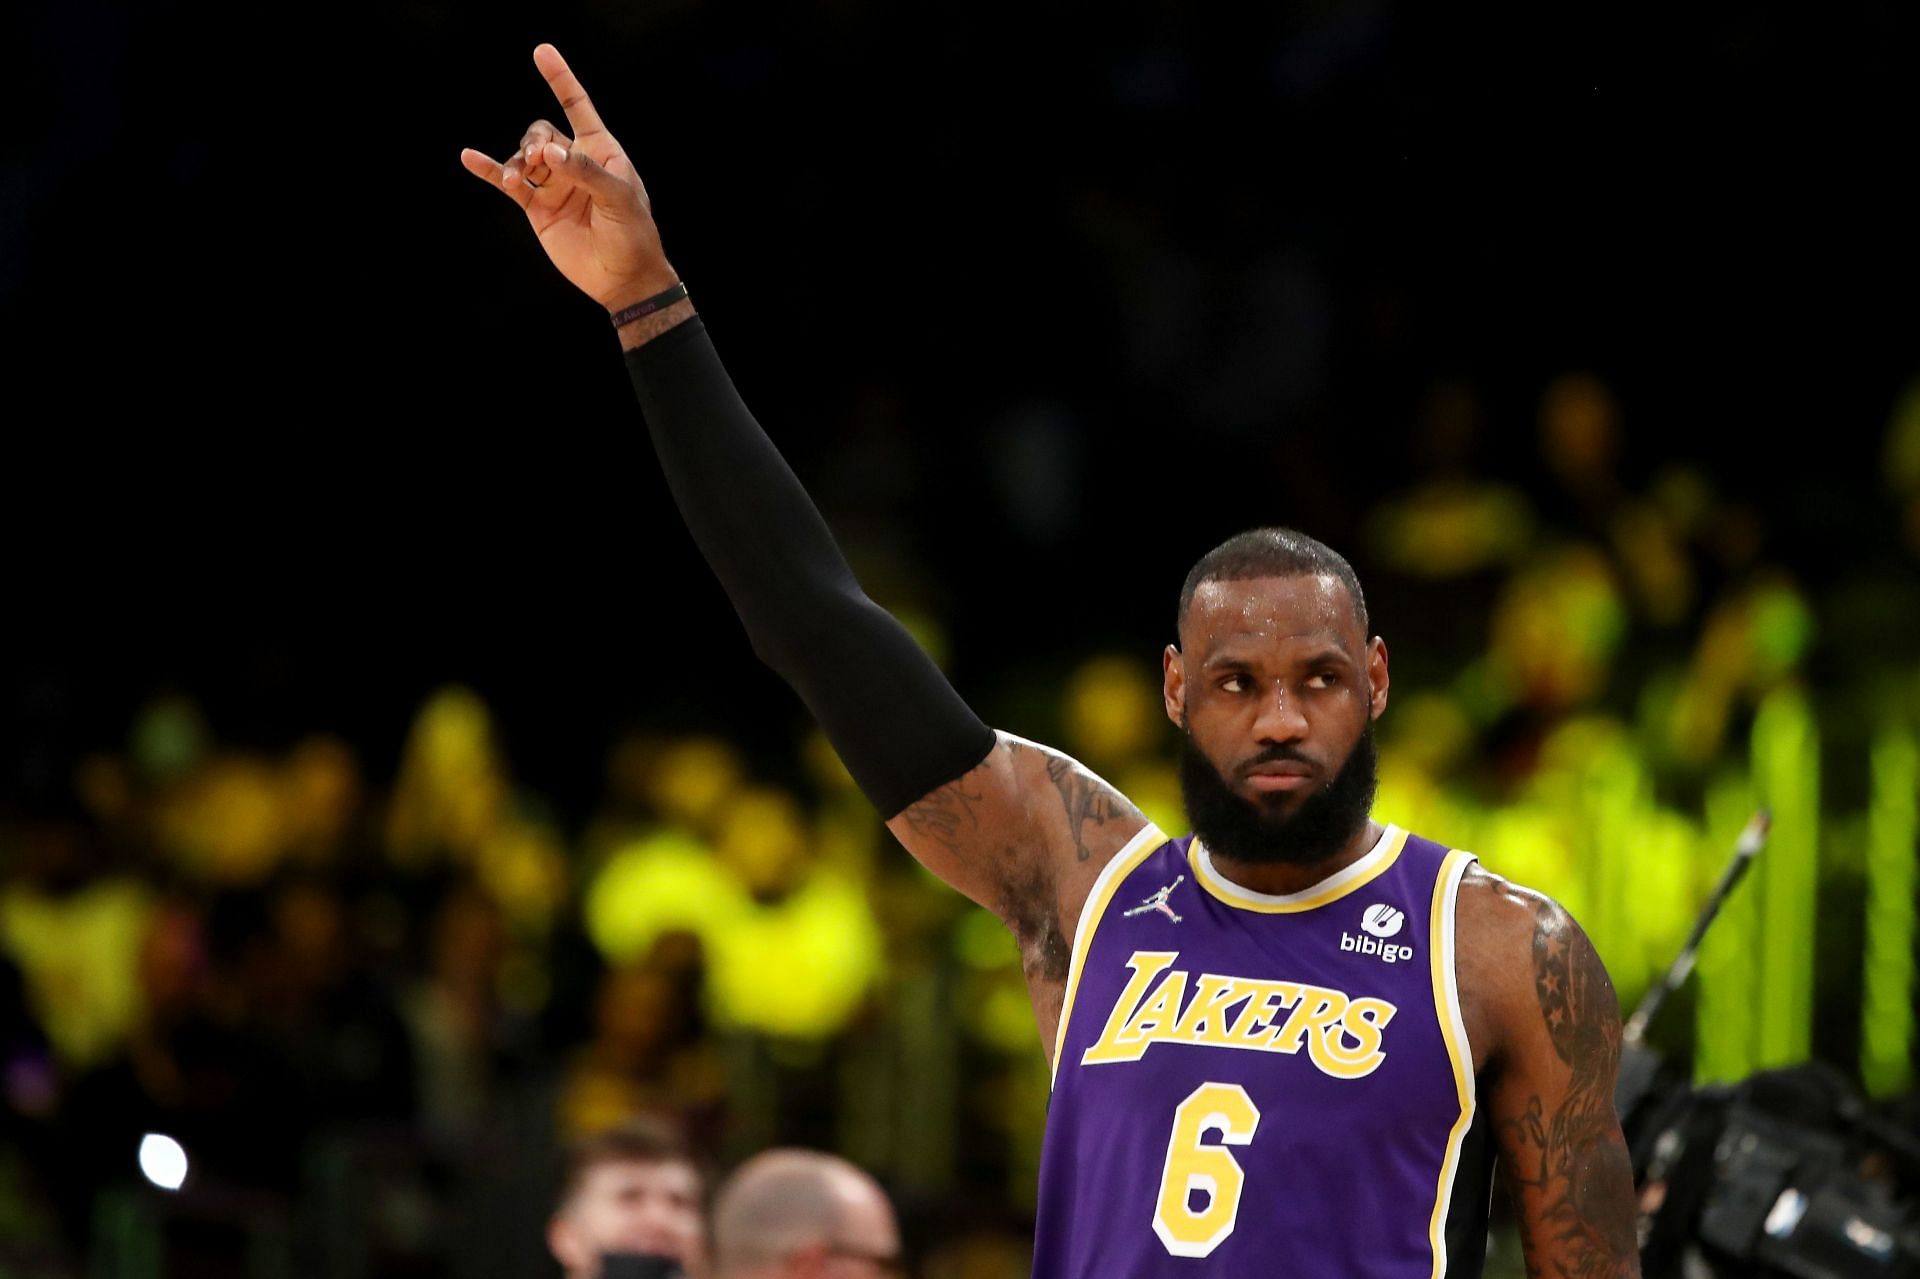 LeBron James led the LA Lakers to a win on Wednesday night